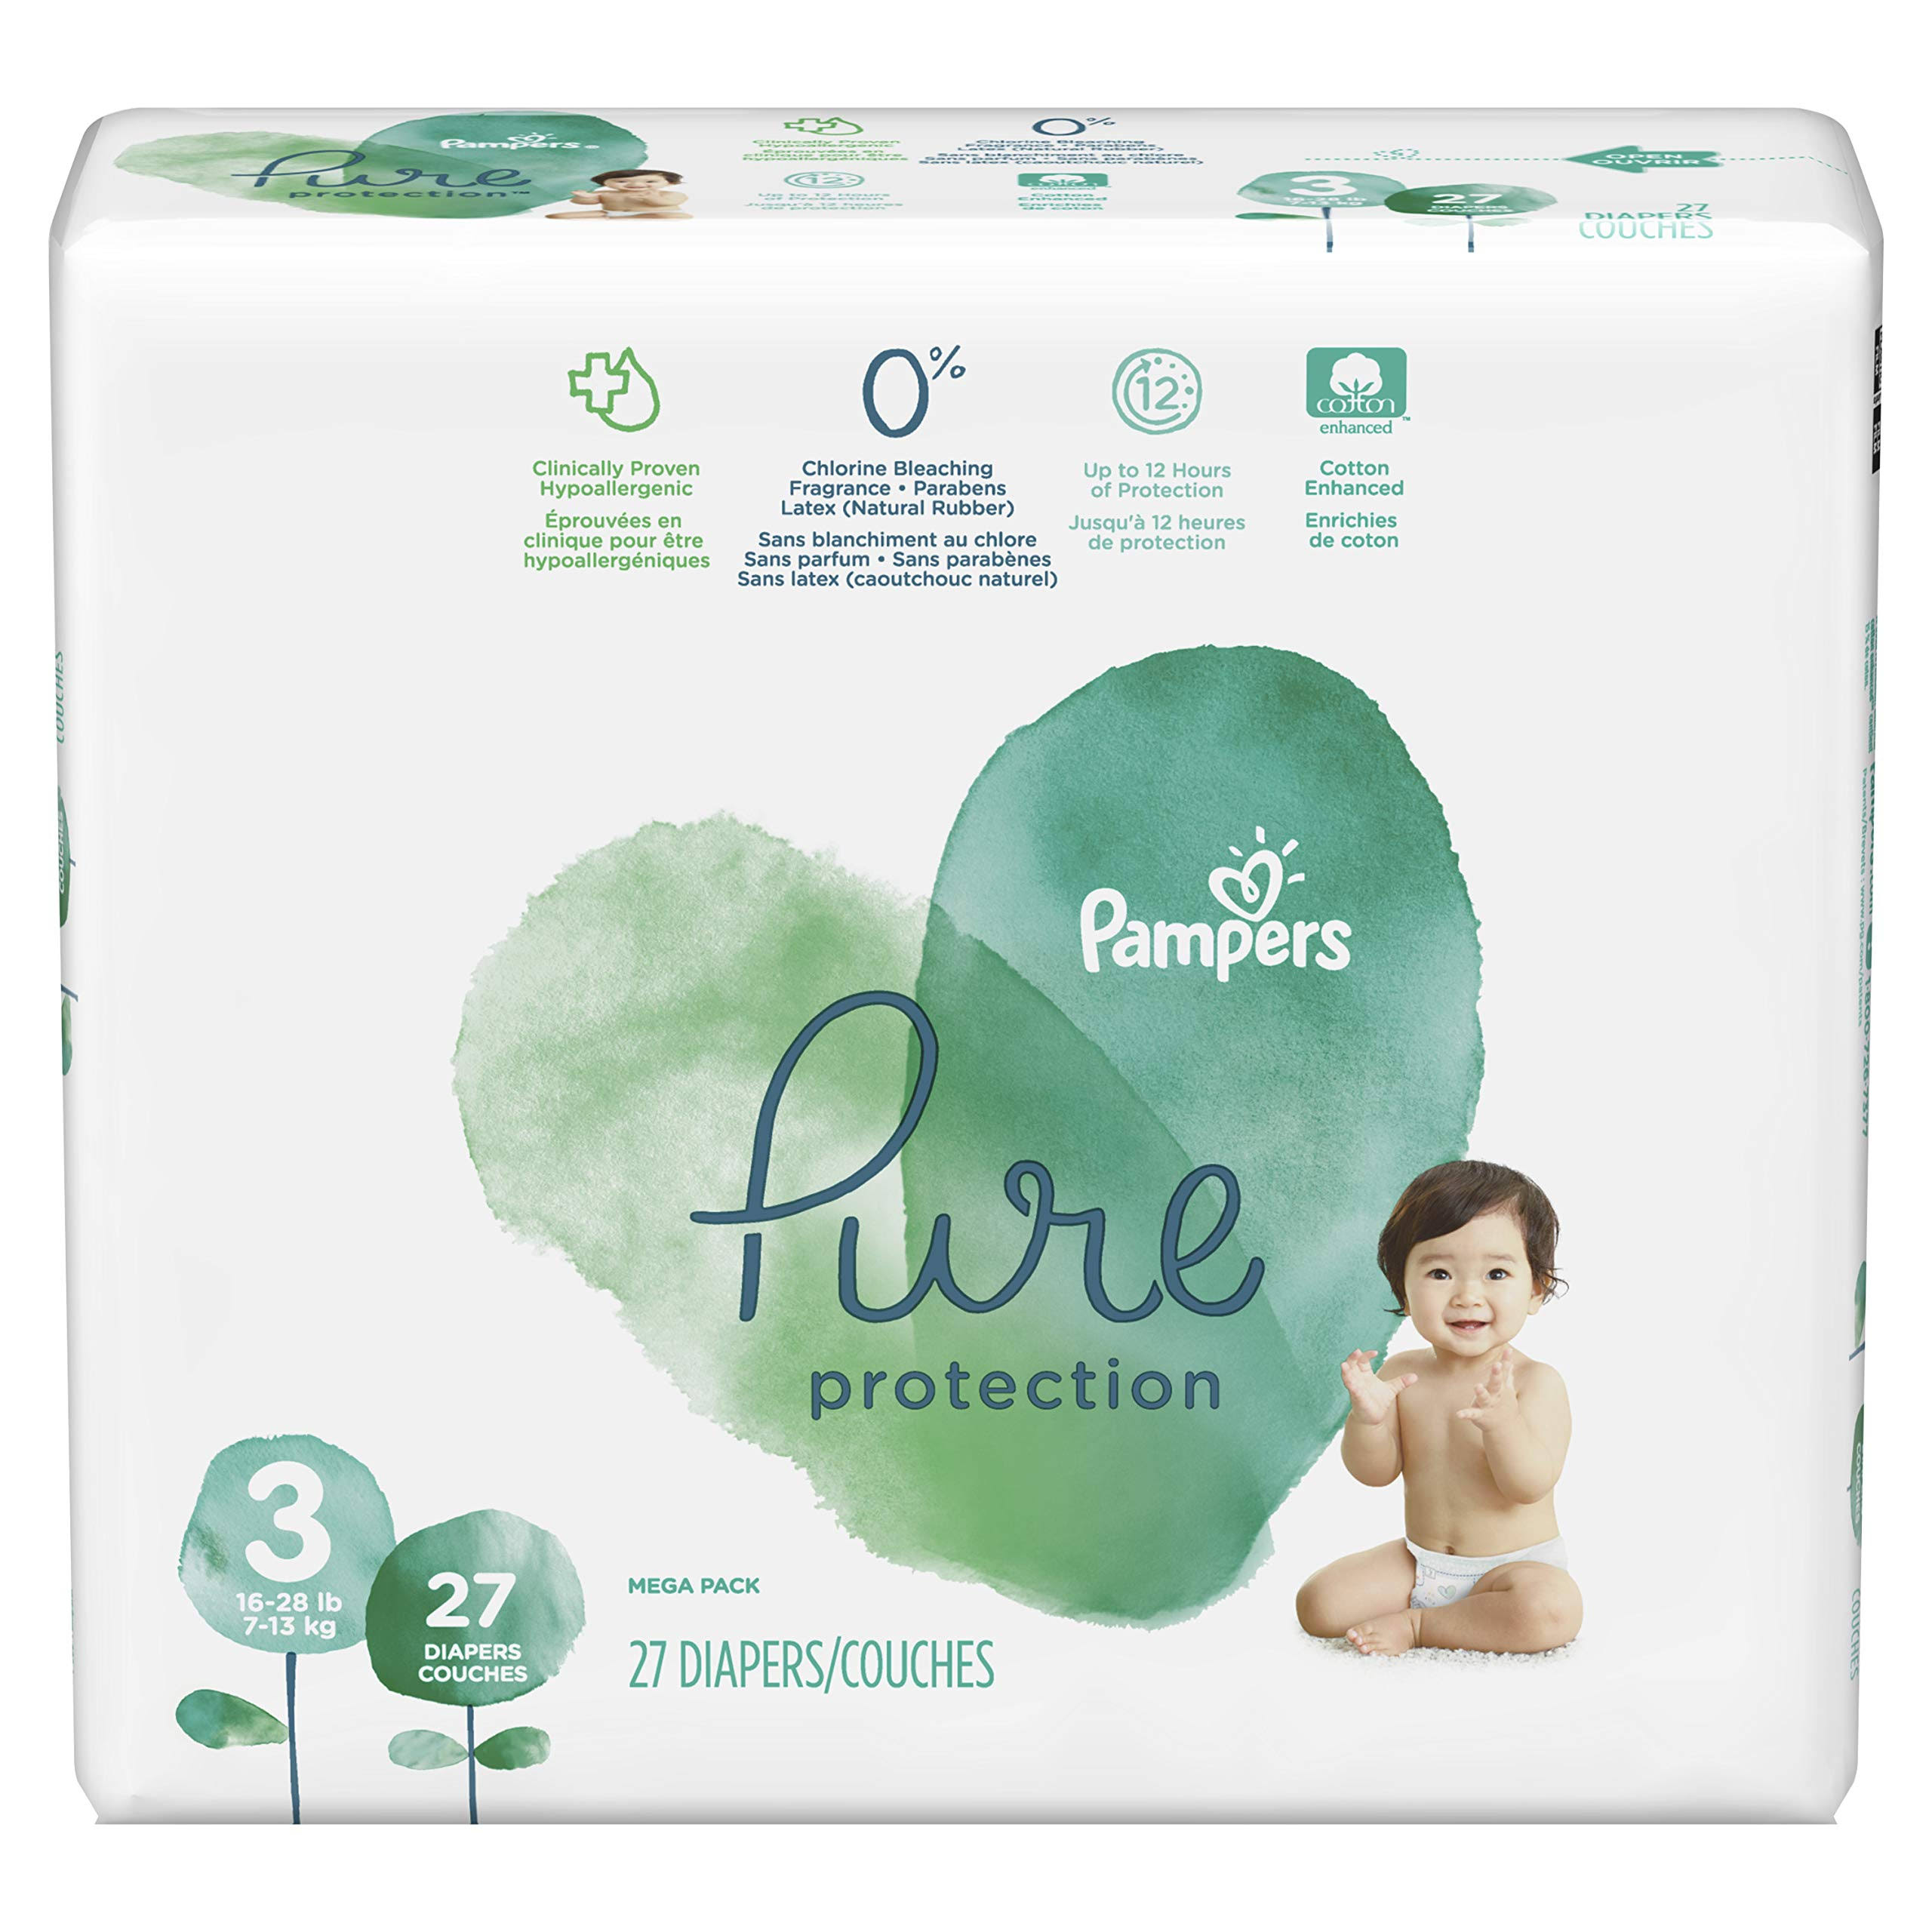 Pampers Pure Protection Newborn Disposable Diapers - #3, 27ct